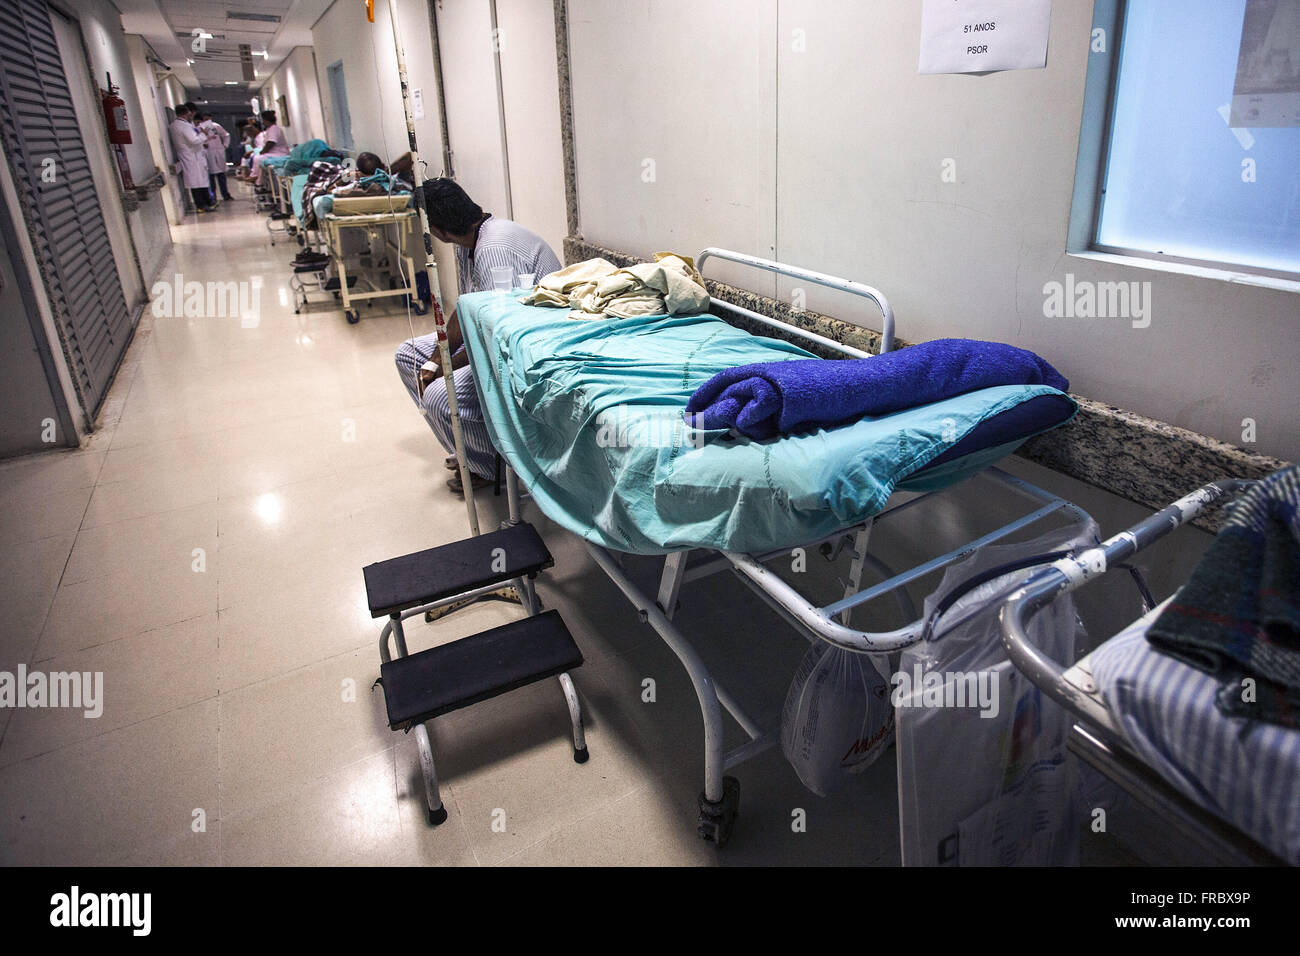 Stretchers in the hallway of the ER crowded public hospital Stock Photo